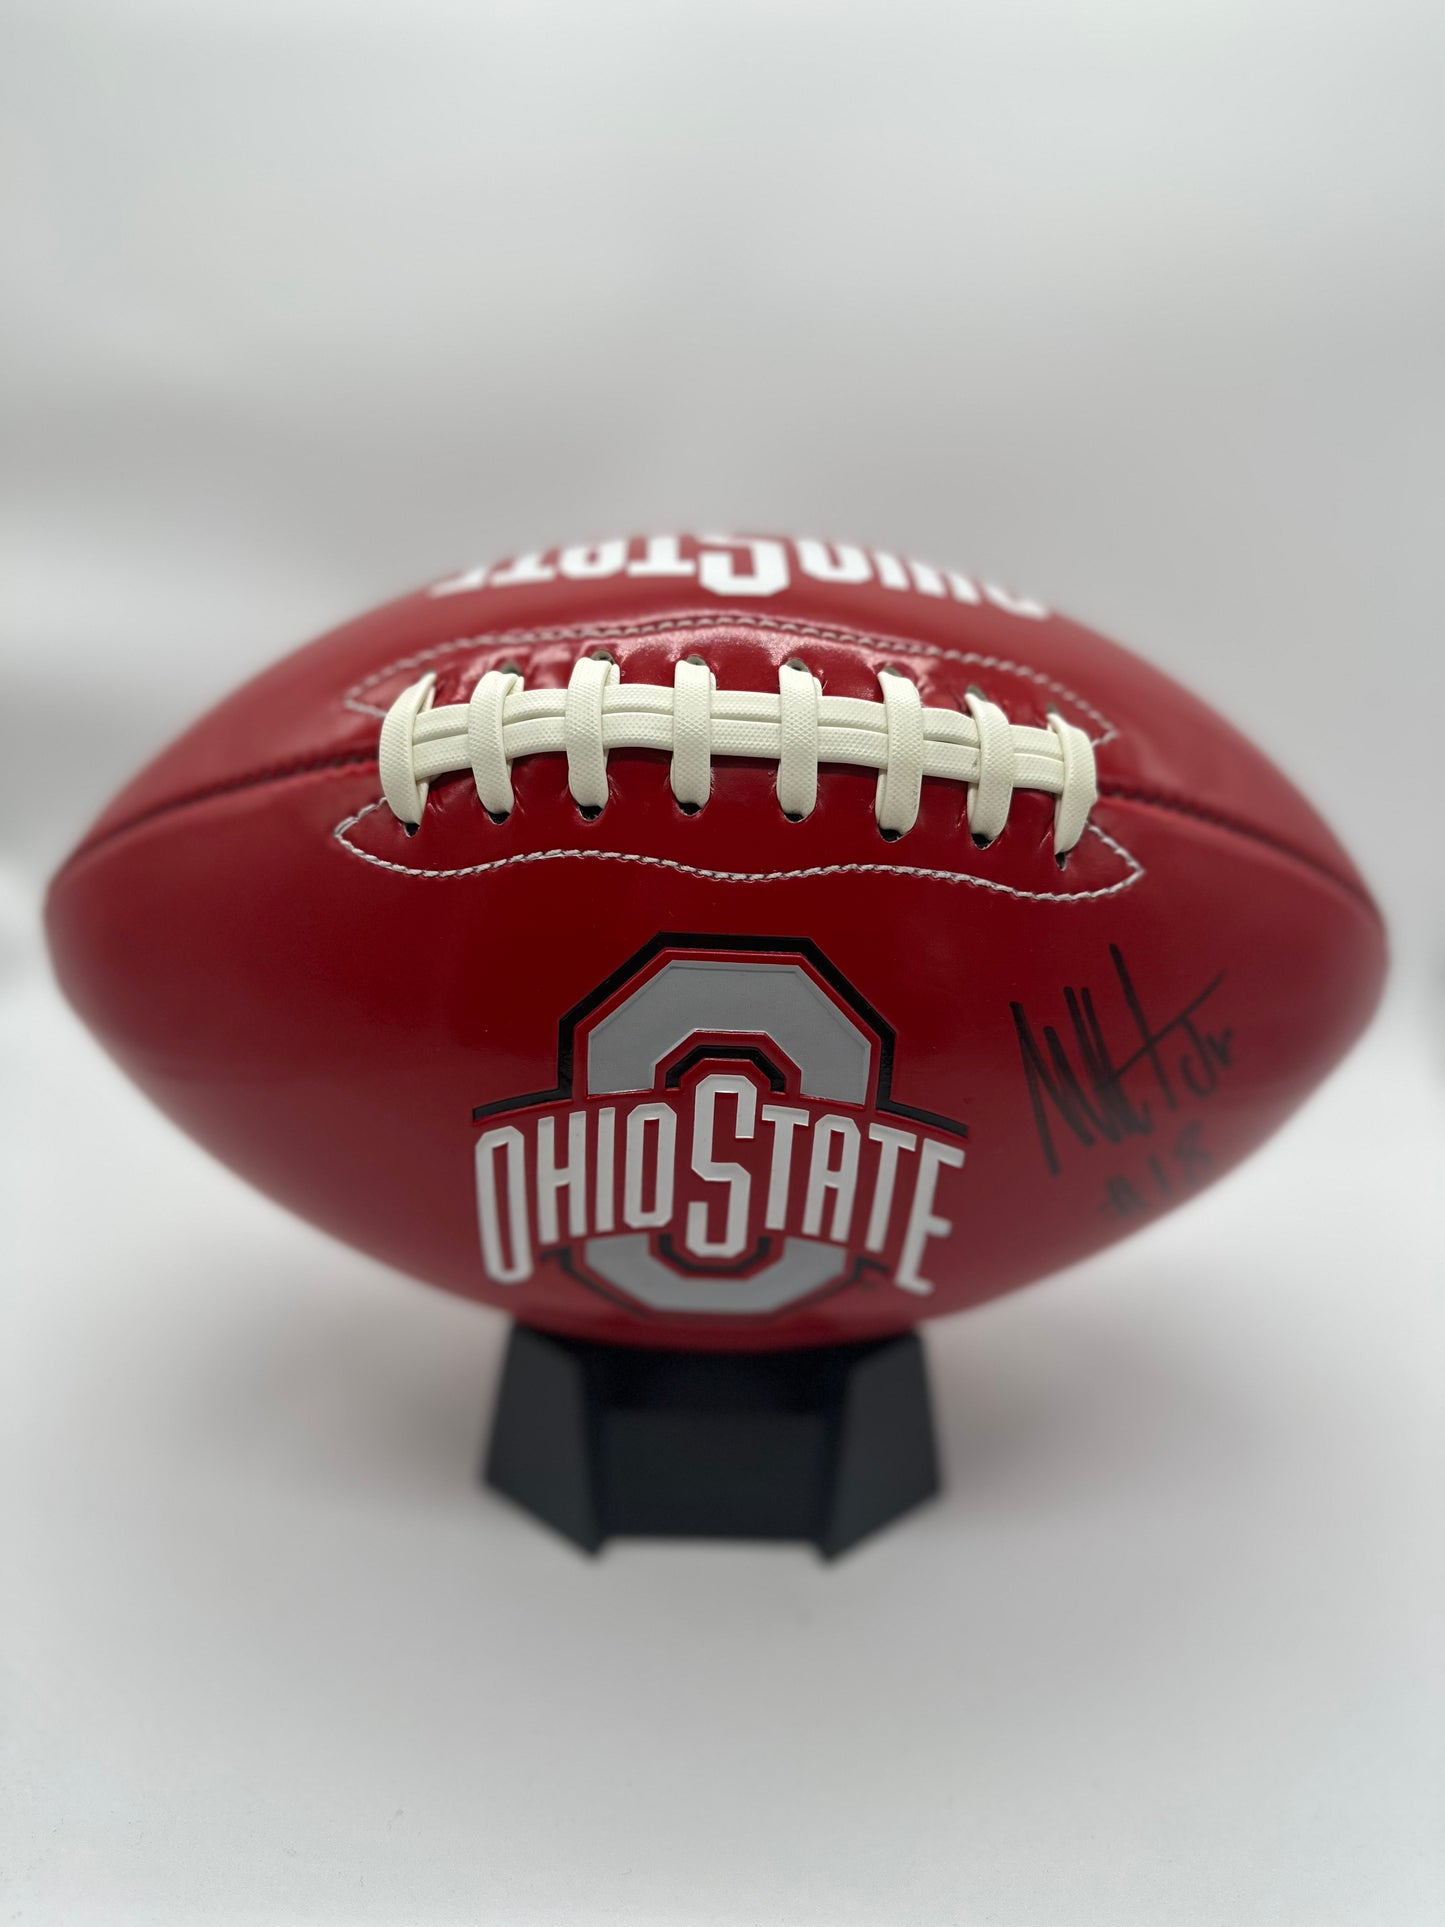 Autographed Marvin Harrison Jr Football - Limited Edition Red